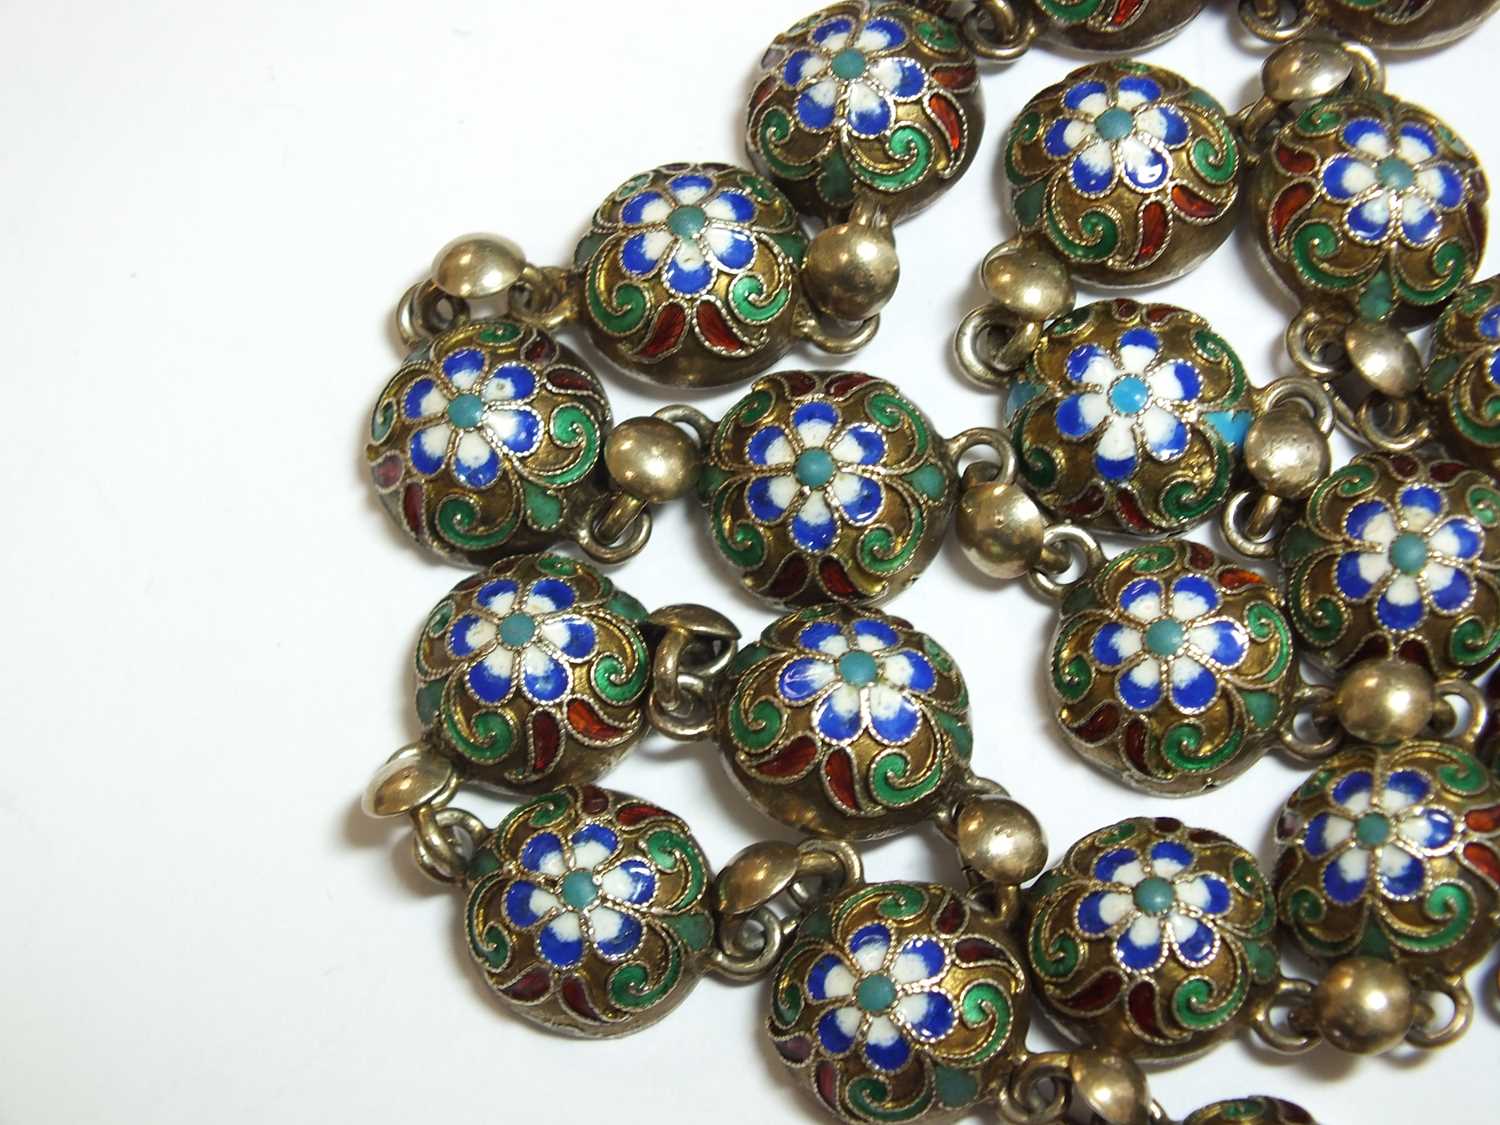 A Russian silver and enamel chain necklace - Image 6 of 15